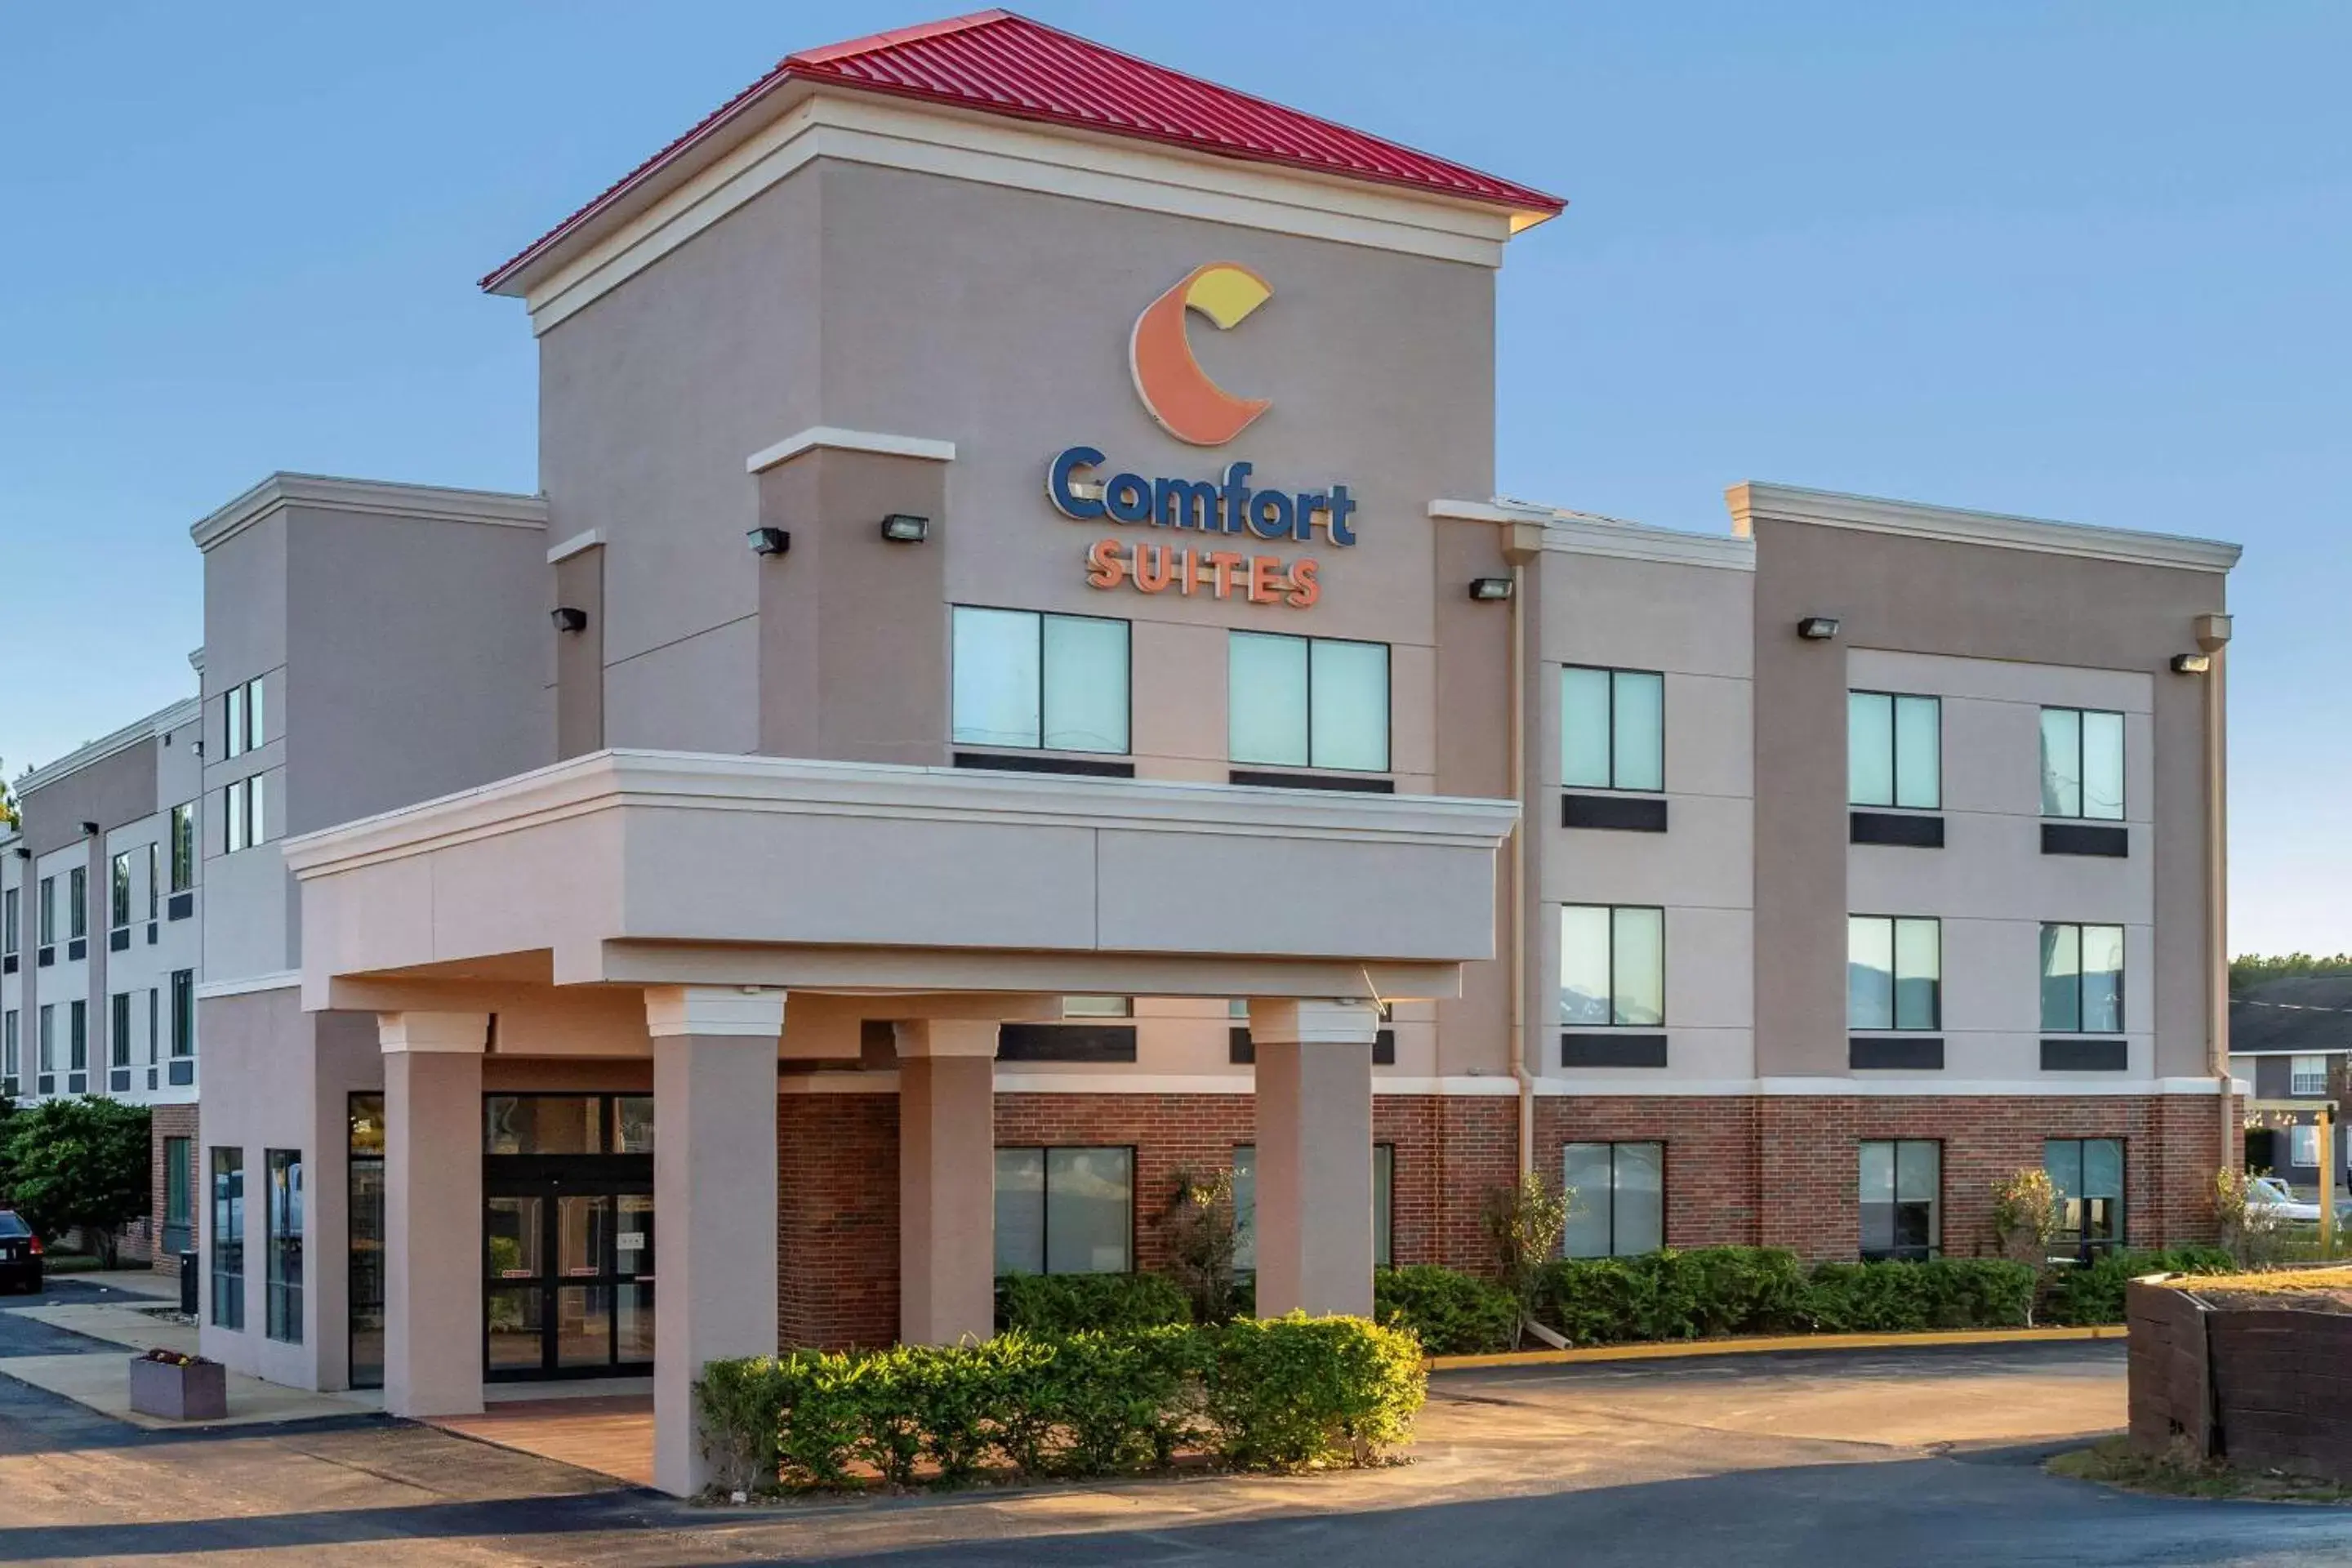 Property Building in Comfort Suites Natchitoches